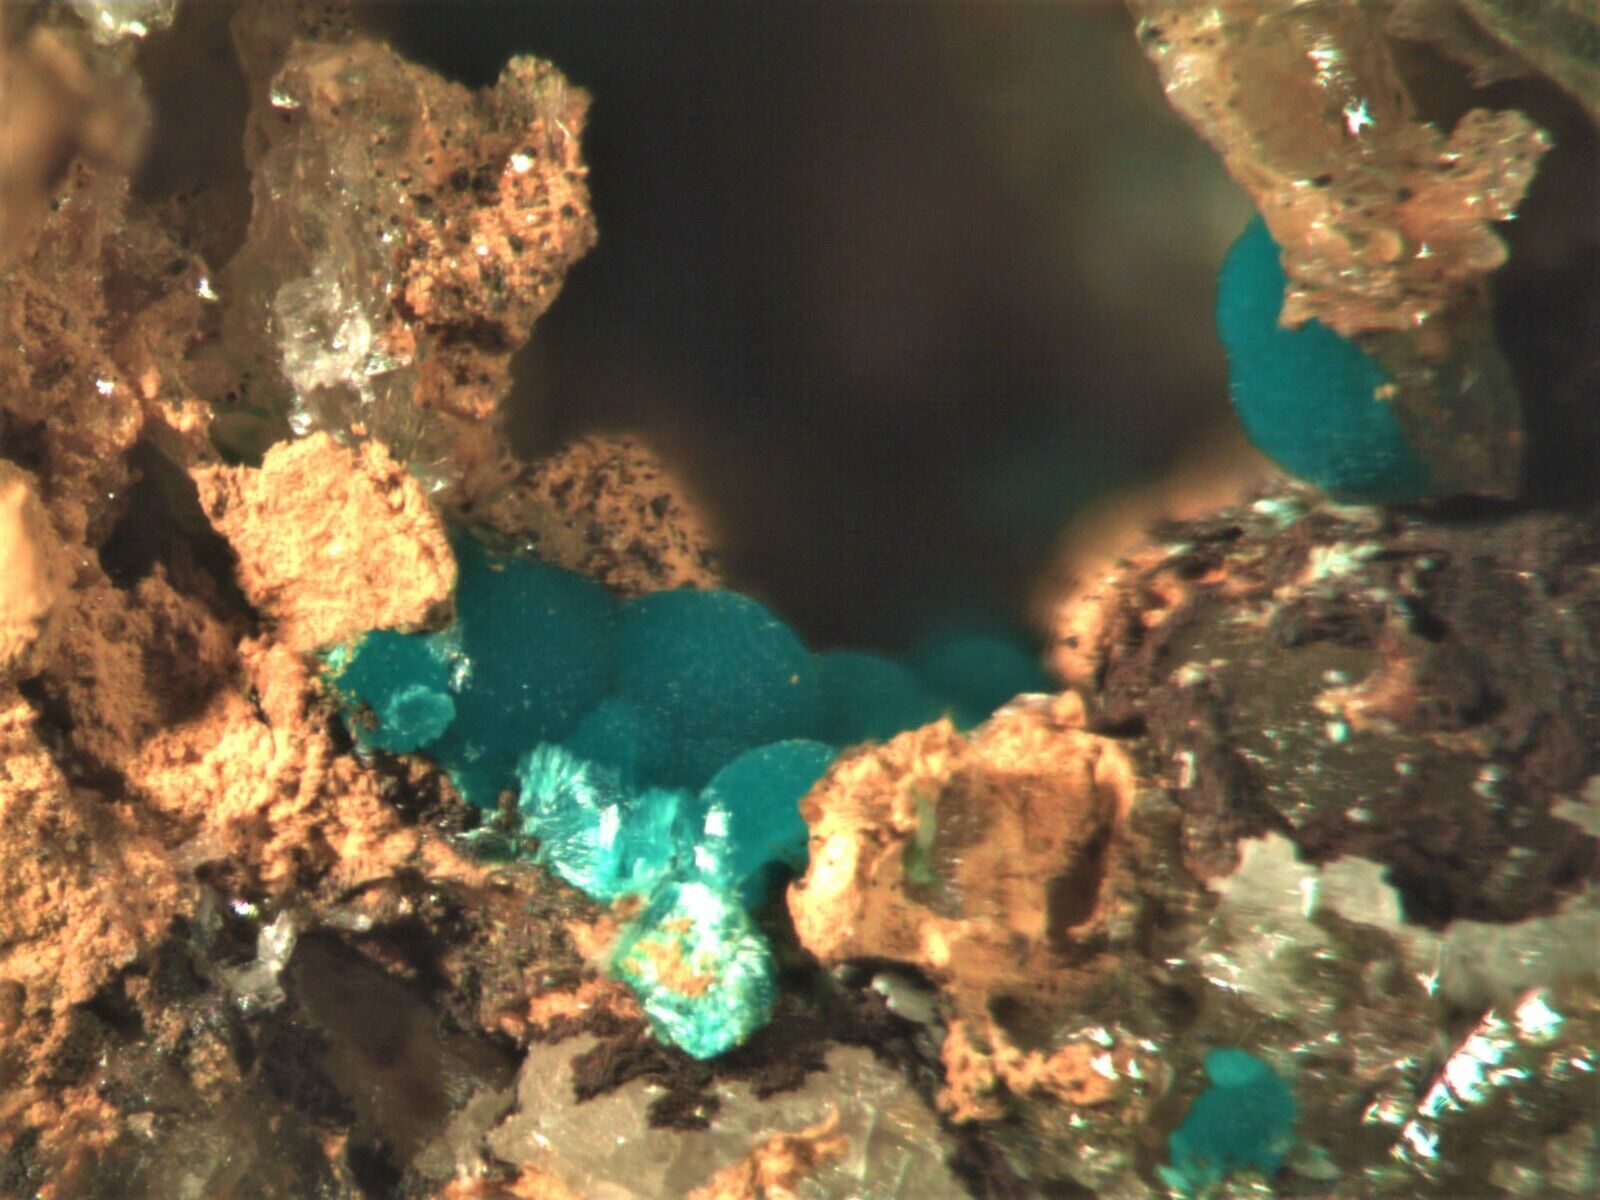 ROSASITE RARE MINERAL MICROMOUNT FROM ITALY